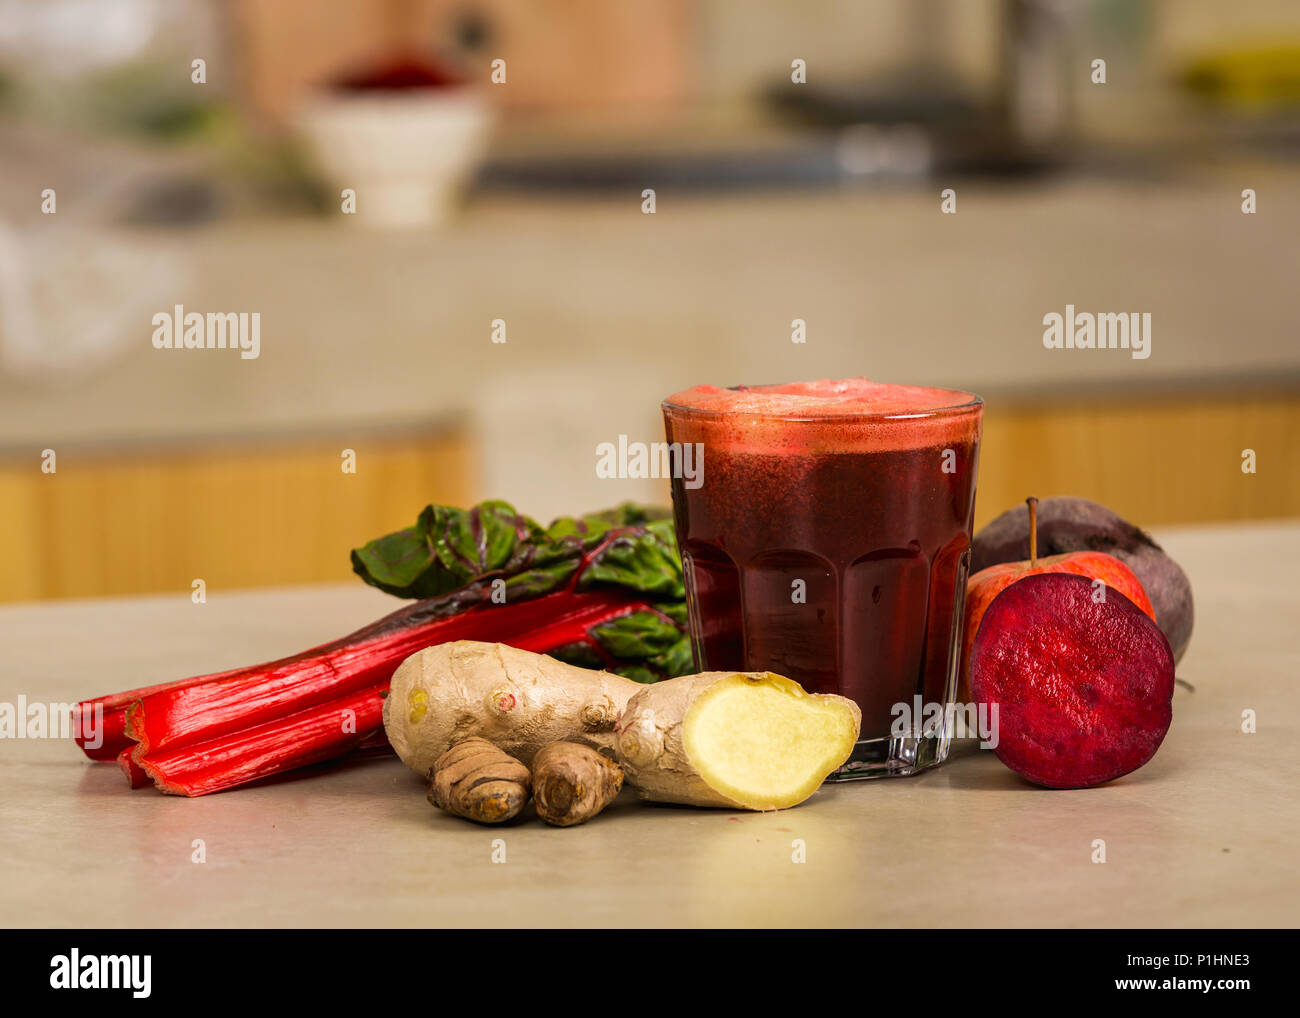 Glass jar of red juice, a detox beverage. Stock Photo